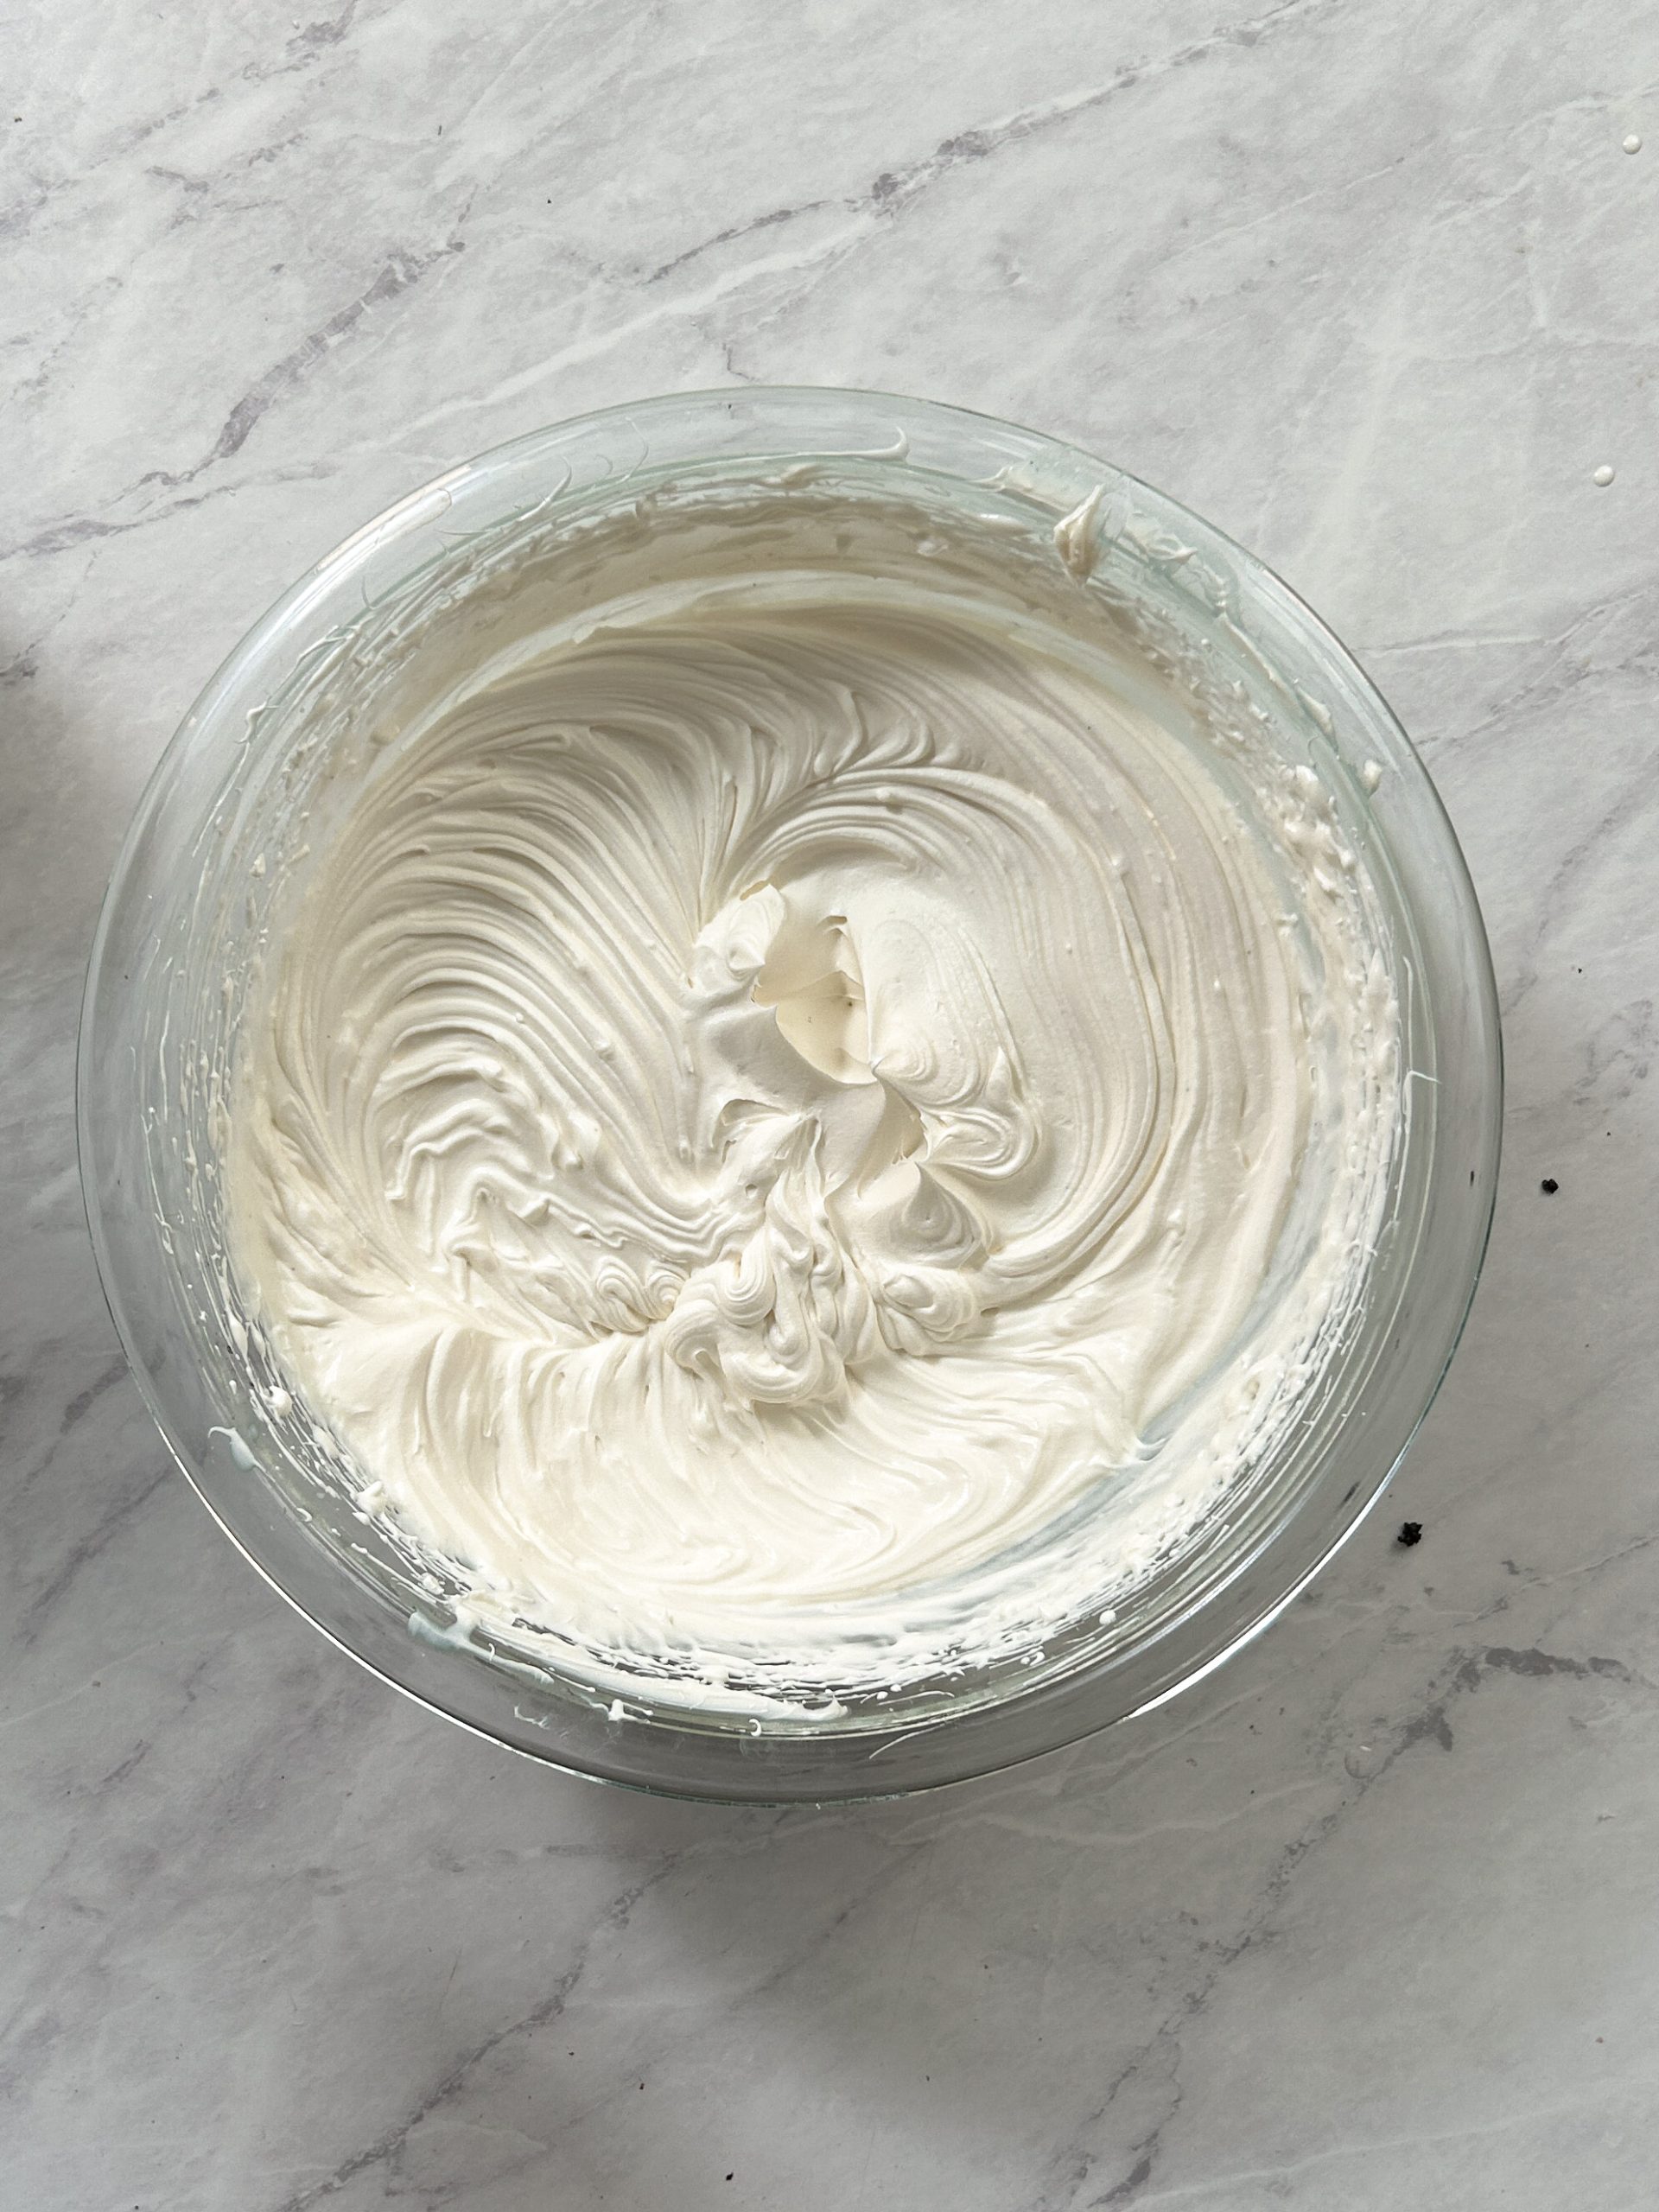 whipped cream with cream cheese whisked to stiff peaks in a glass bowl